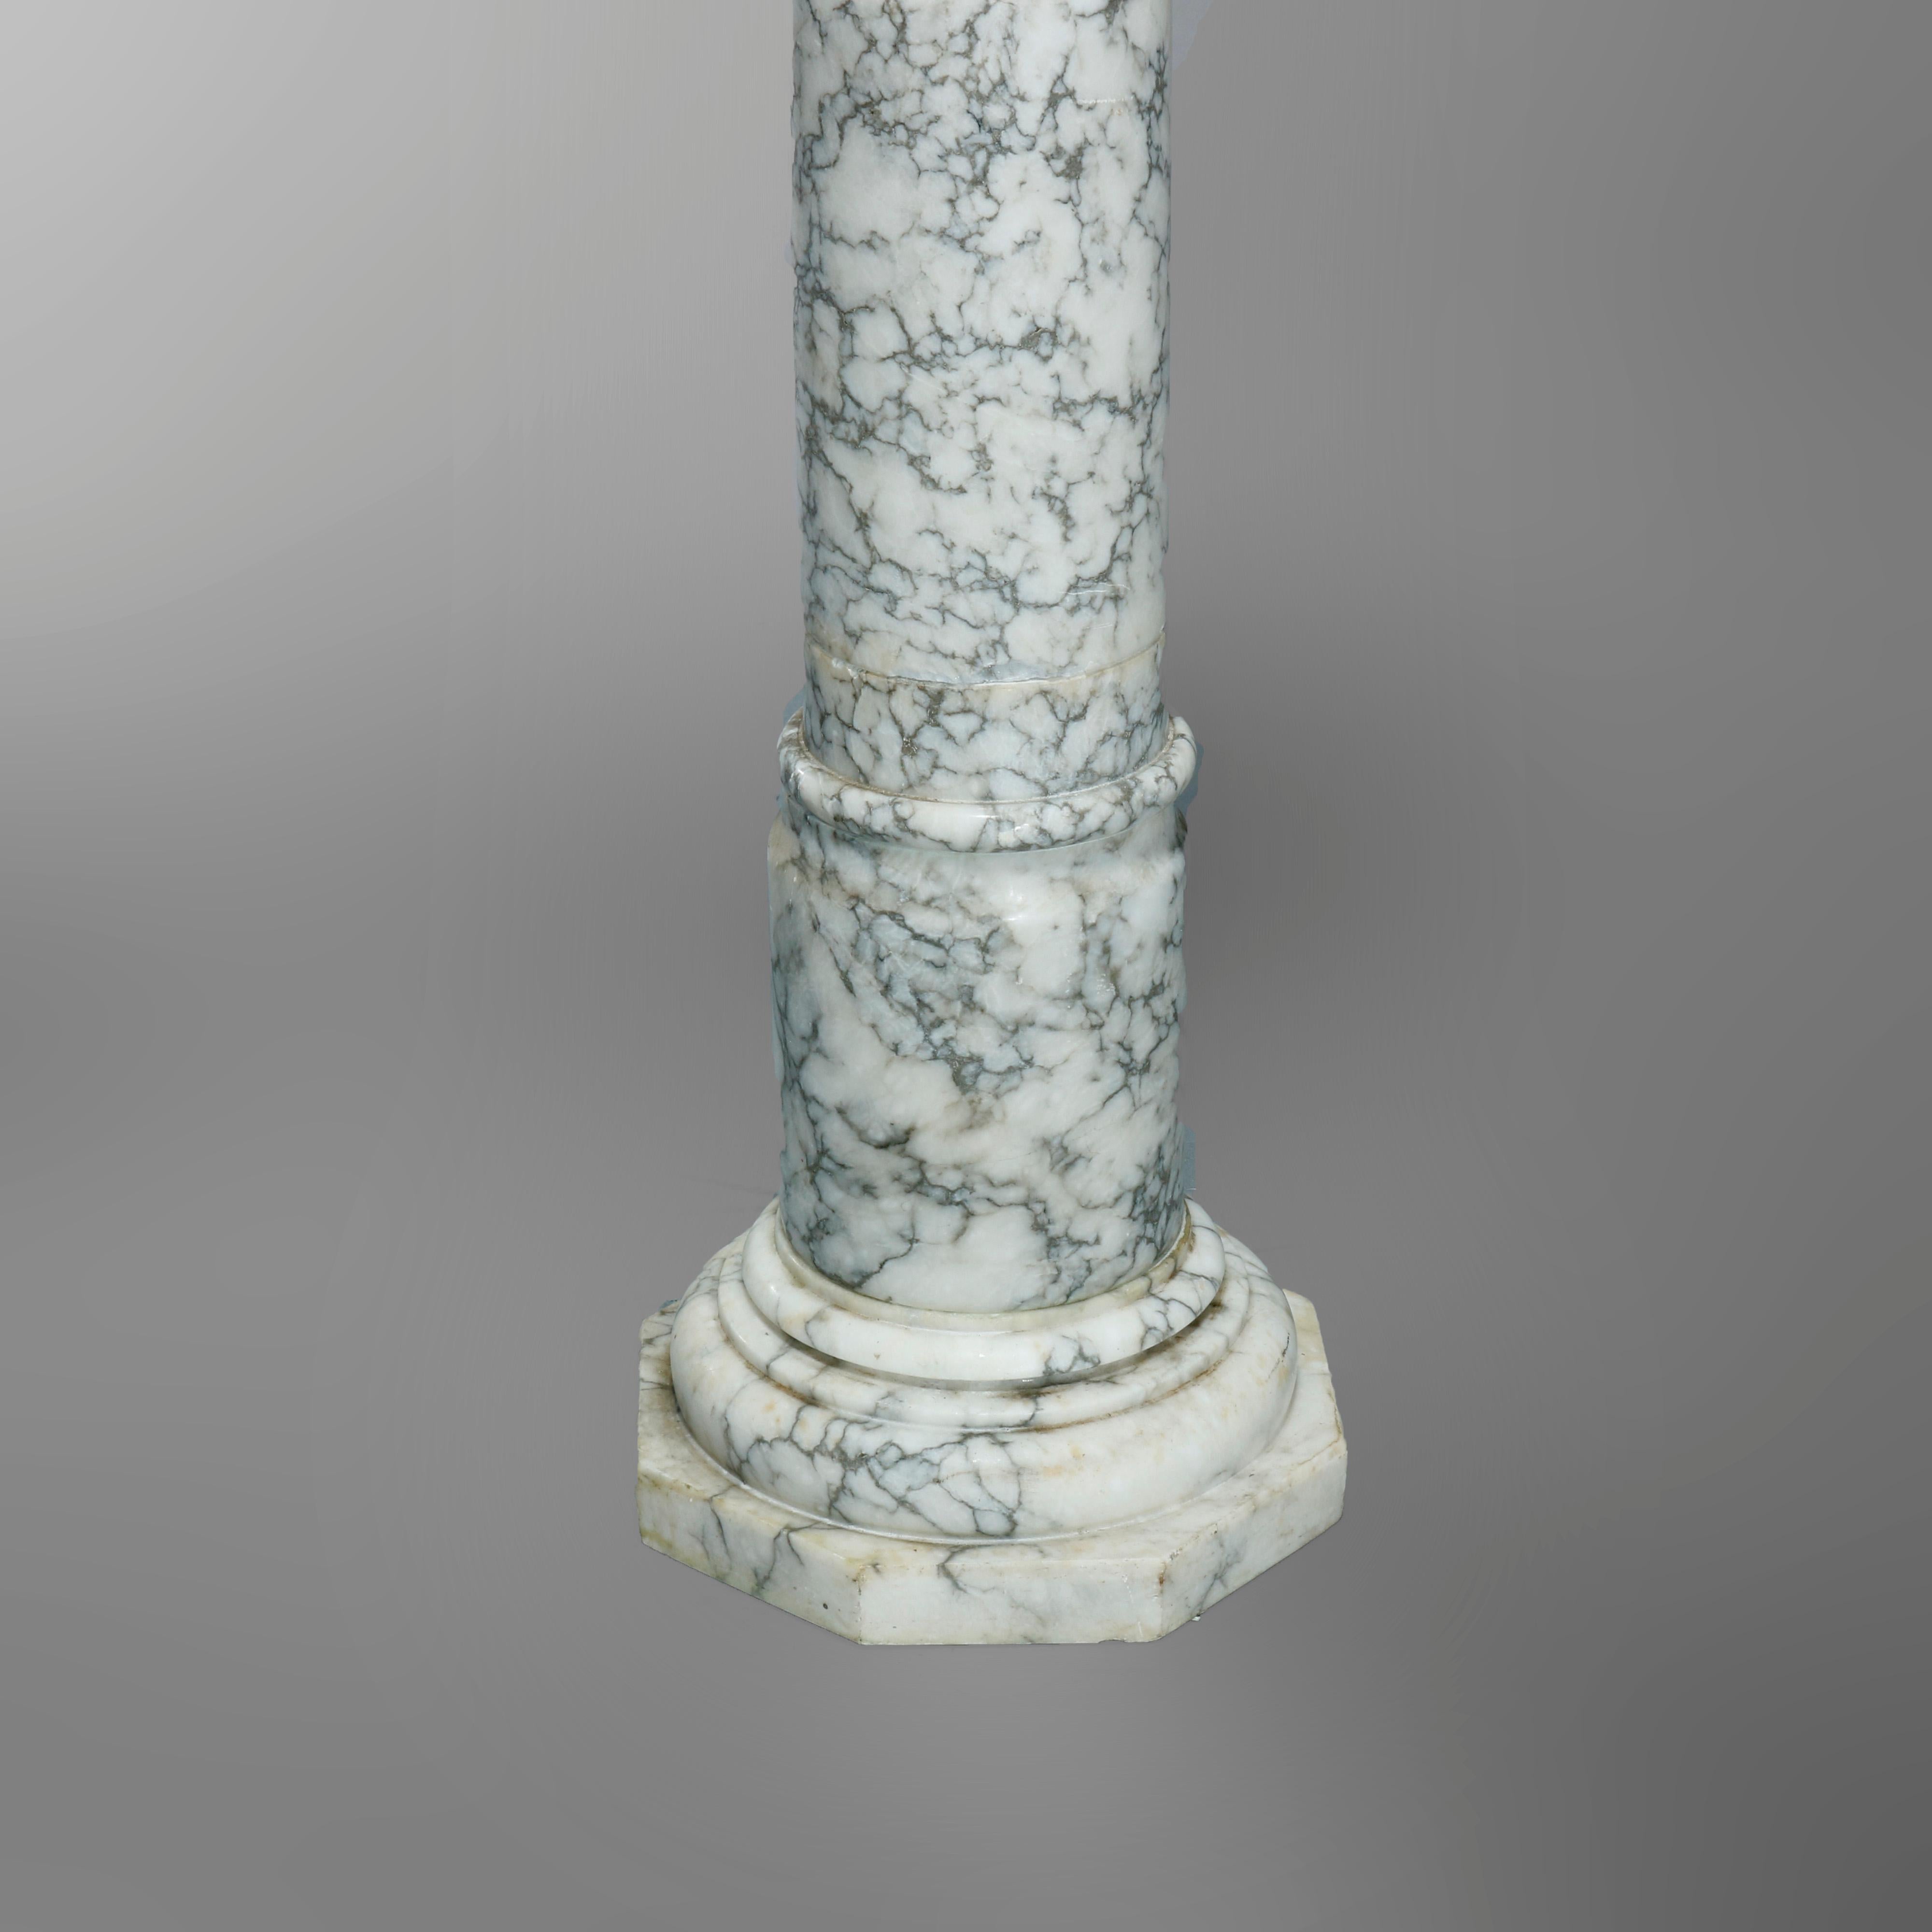 Neoclassical Antique Neo-Classical Variegated Marble Sculpture Display Pedestal, circa 1900 For Sale